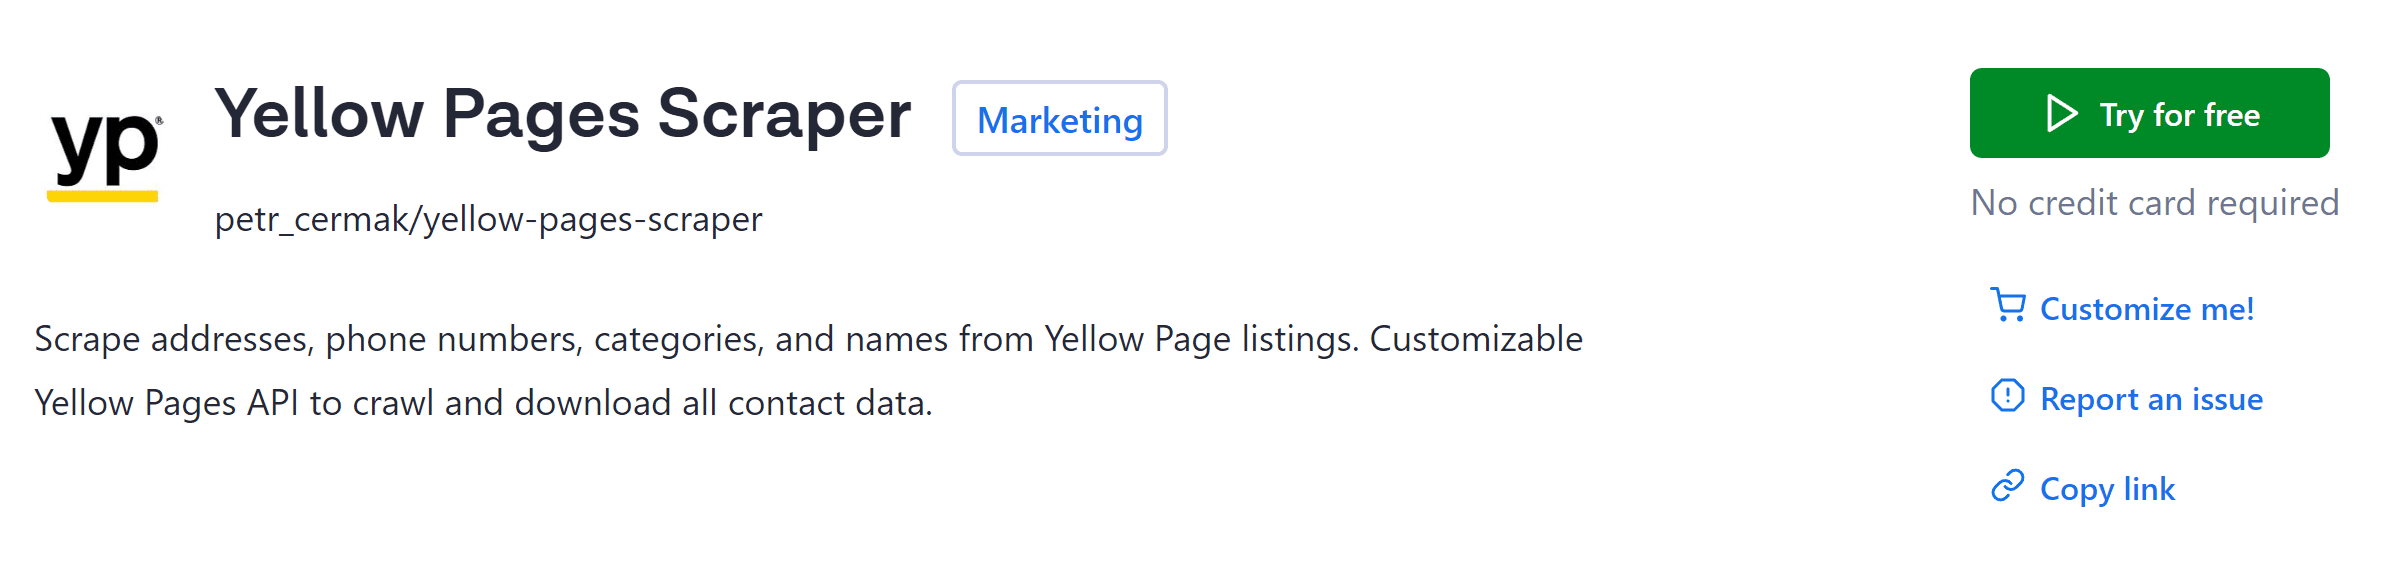 Step 1. Go to Yellow Pages Scraper on Apify Store